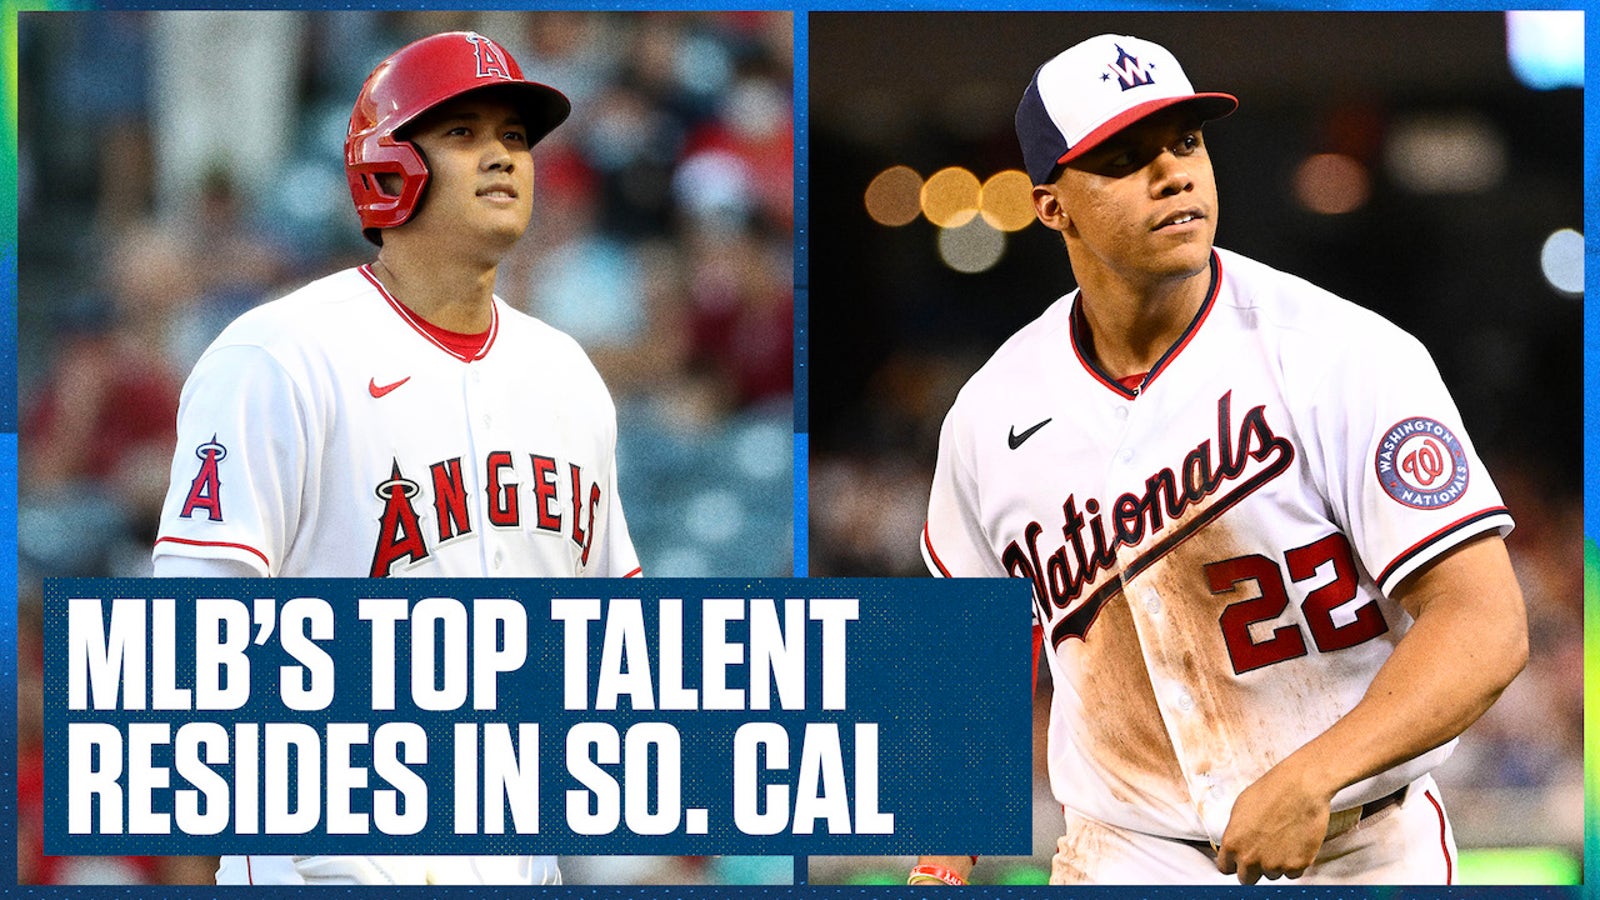 Shohei Ohtani, Juan Soto and others make Southern California the best pool of talent in the MLB